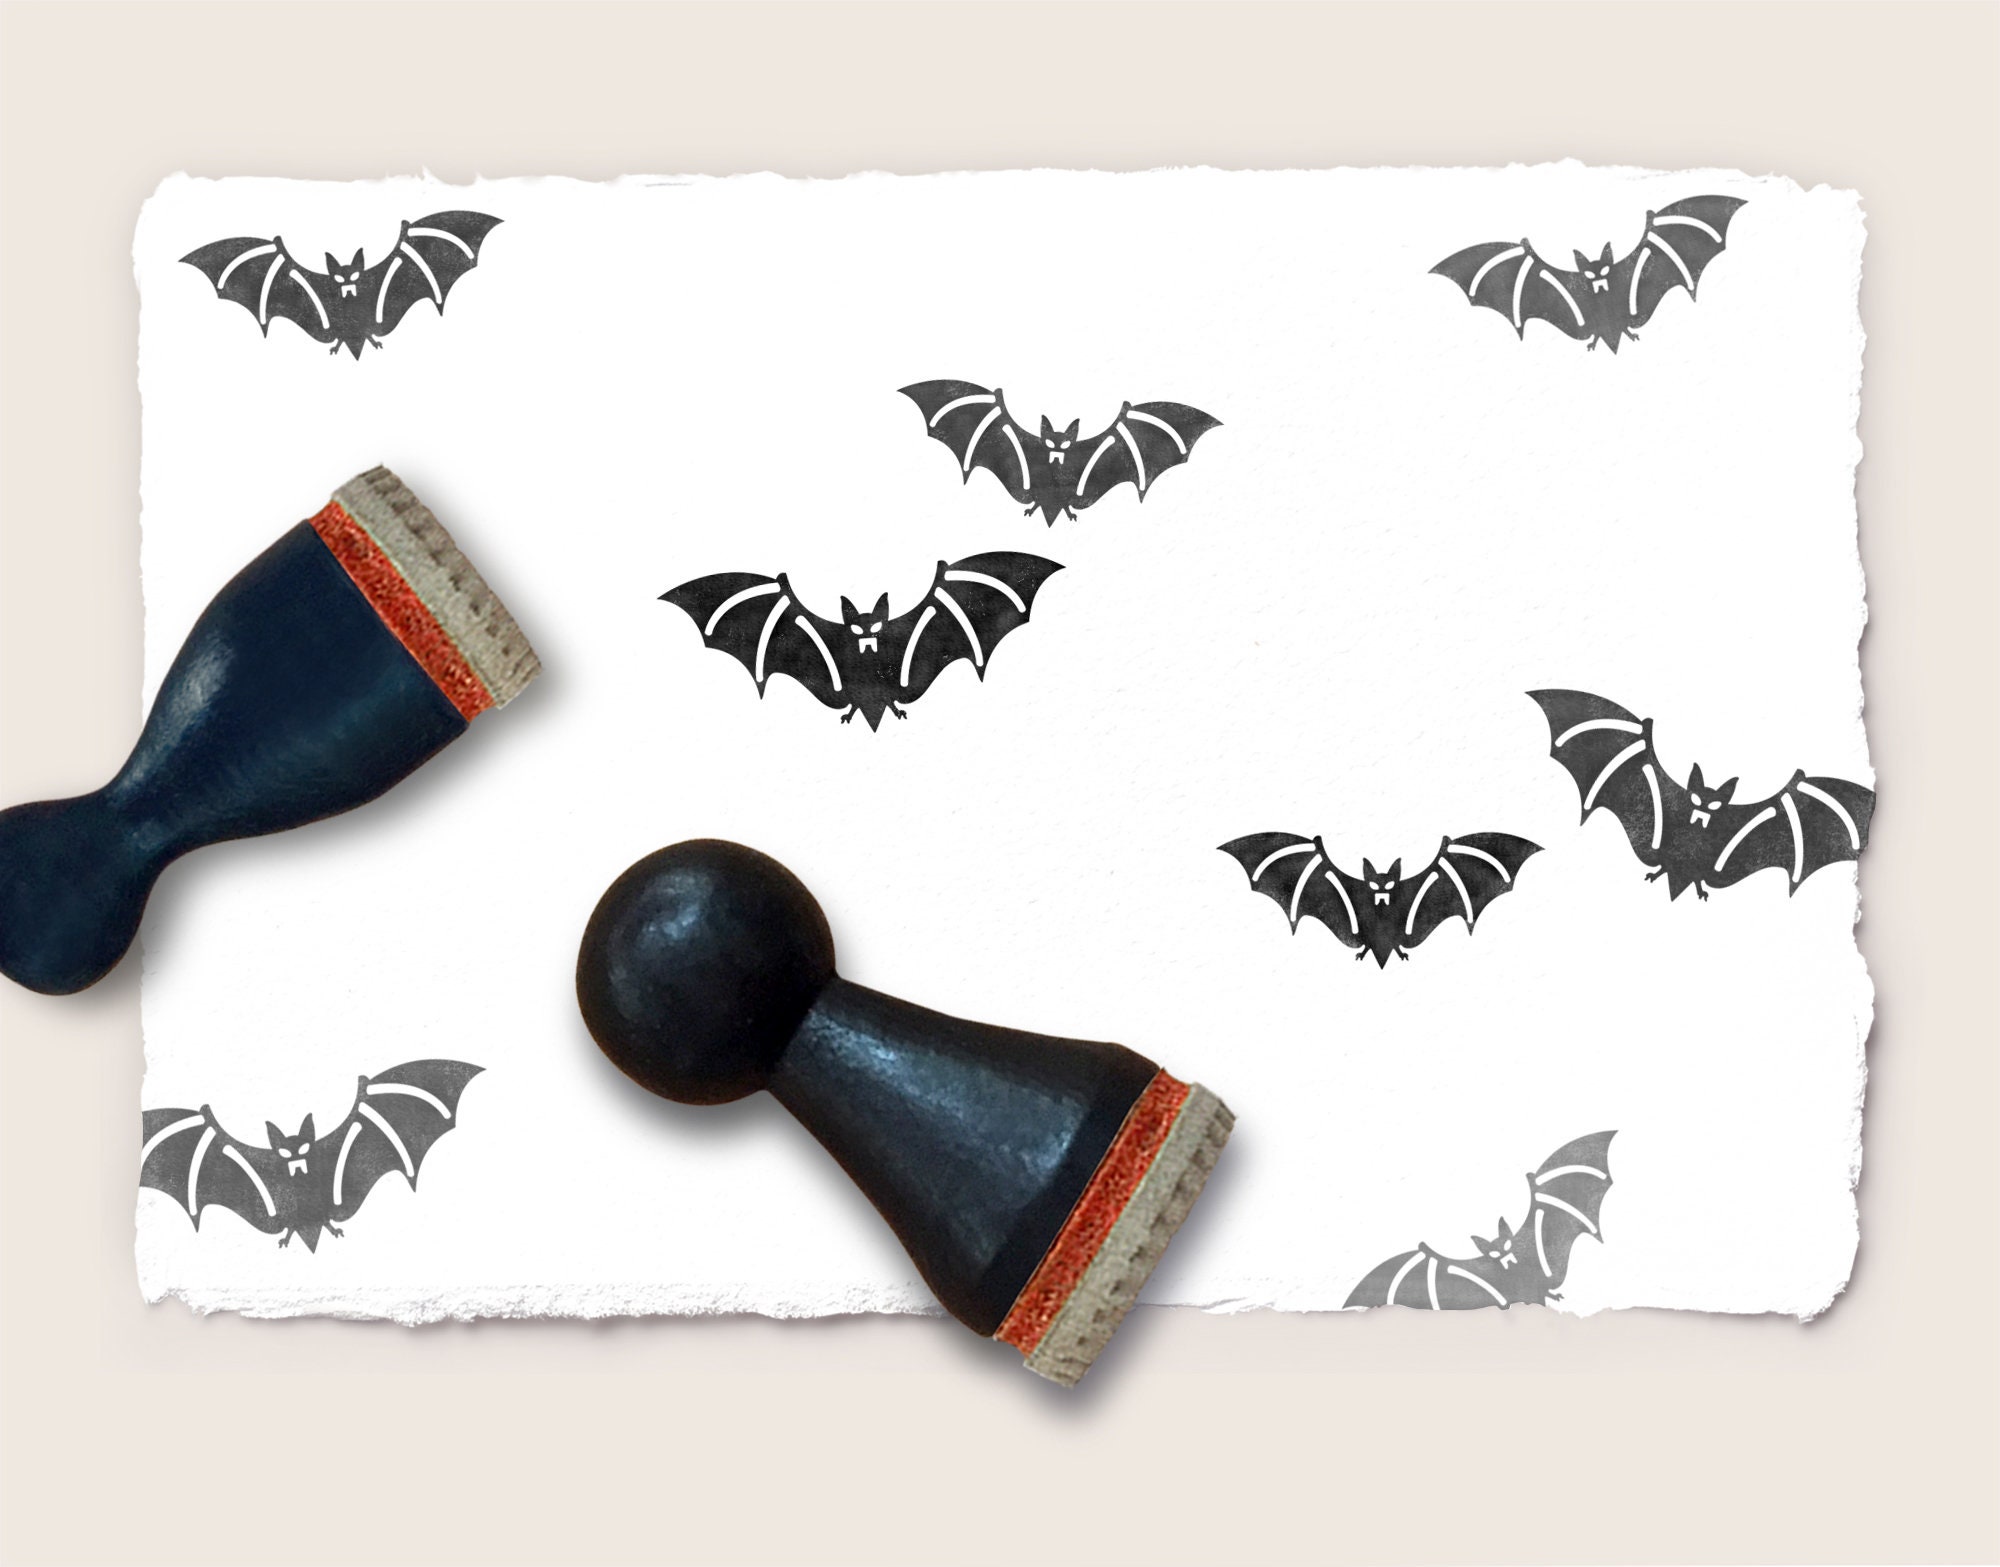 Scared Halloween Cat Self-Inking Stamp